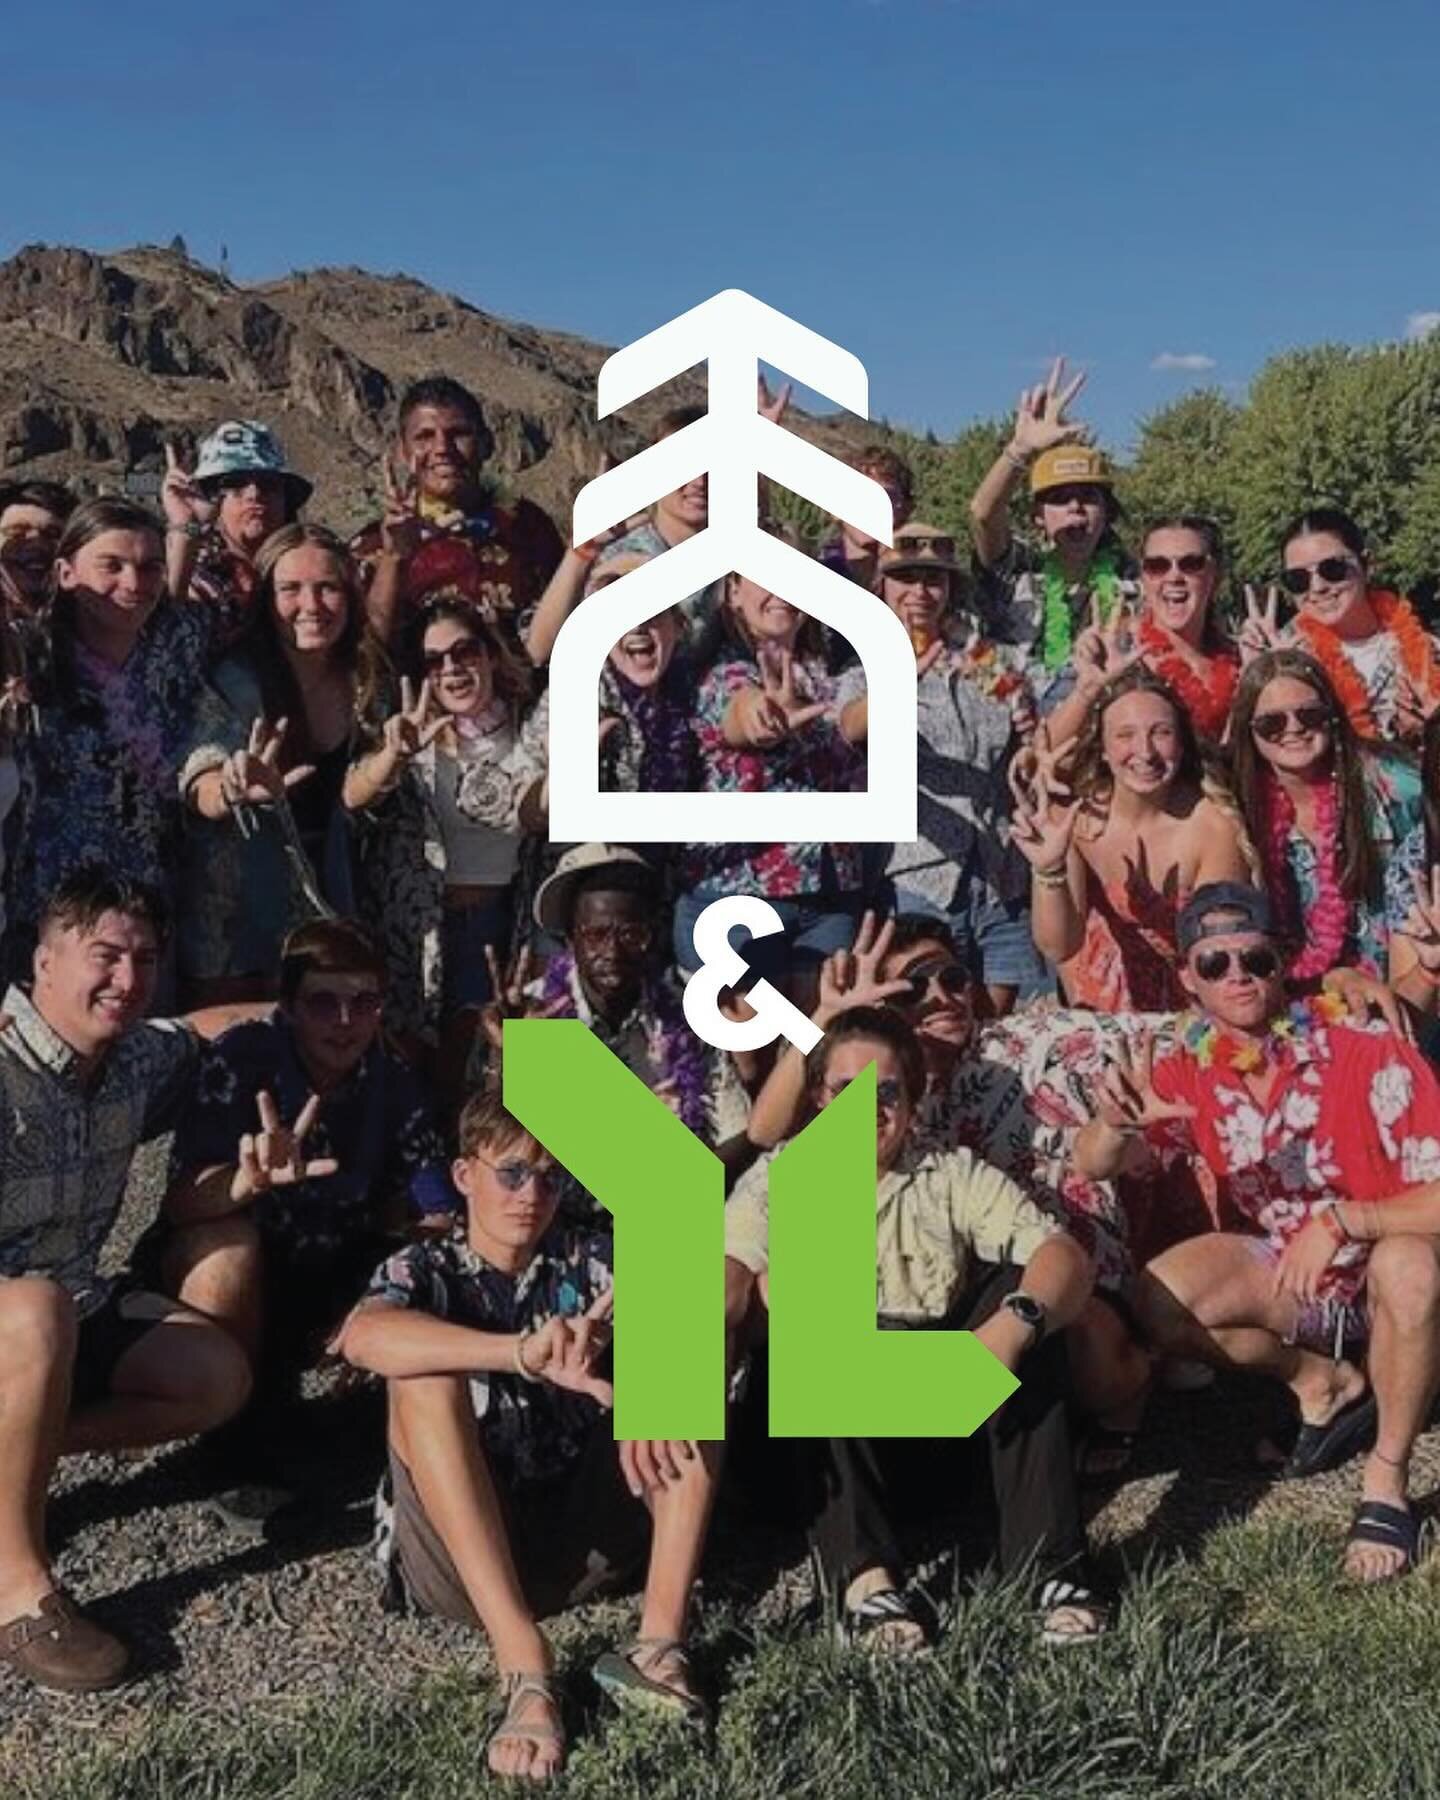 🎉 We have big news! 🎉 

Partnering with us in 2024 enables life-shaping opportunities for local youth through YoungLife. With every transaction we close, we&rsquo;re donating $1,000 to YoungLife in Spokane for camp scholarships, which means a local